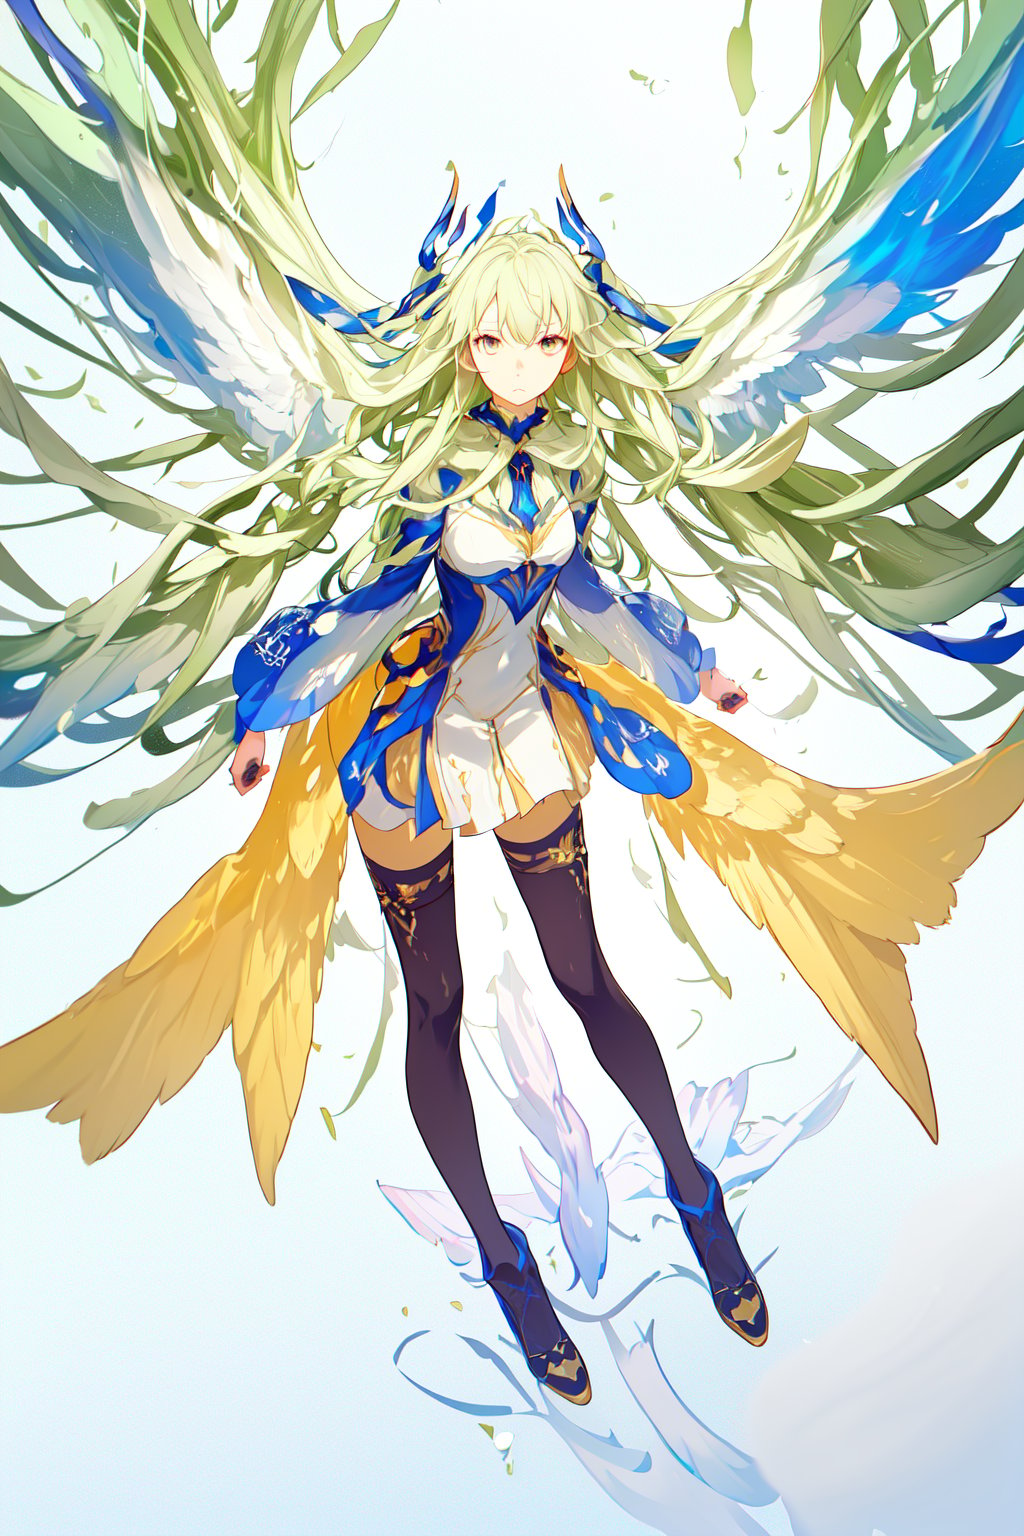 (HAIR AS WING:1.4), (masterpiece:1.2), (best quality), 8K wallpaper, (highres), (ultra detailed:1.2), sharp lines,

(long hair:1.4), (hair like wings:1.3), (wings parallel to head:1.2), (flowing hair:1.1), (anime style:1.2),

(detailed hair:1.2), (hair texture:1.1), (hair highlights:1.1), (hair shadows:1.1), (hair color:1.1), (hair movement:1.1),

(solo:1.1), (full body:1.1), (female:1.1), (looking at viewer:1.1), (calm expression:1.1), (soft skin:1.1),

(floating:1.1), (magical effect:1.1), (glowing particles:1.1), (fantasy background:1.1), (soft light:1.1), (dynamic composition:1.1),

(solo:1.1), (full body:1.1), (female:1.1), (looking at viewer:1.1), (calm expression:1.1), (soft skin:1.1),

(fantasy background:1.1), (glowing background:1.1), (light source:1.1), (soft light:1.1), (dynamic composition:1.1), (detailed background:1.1),